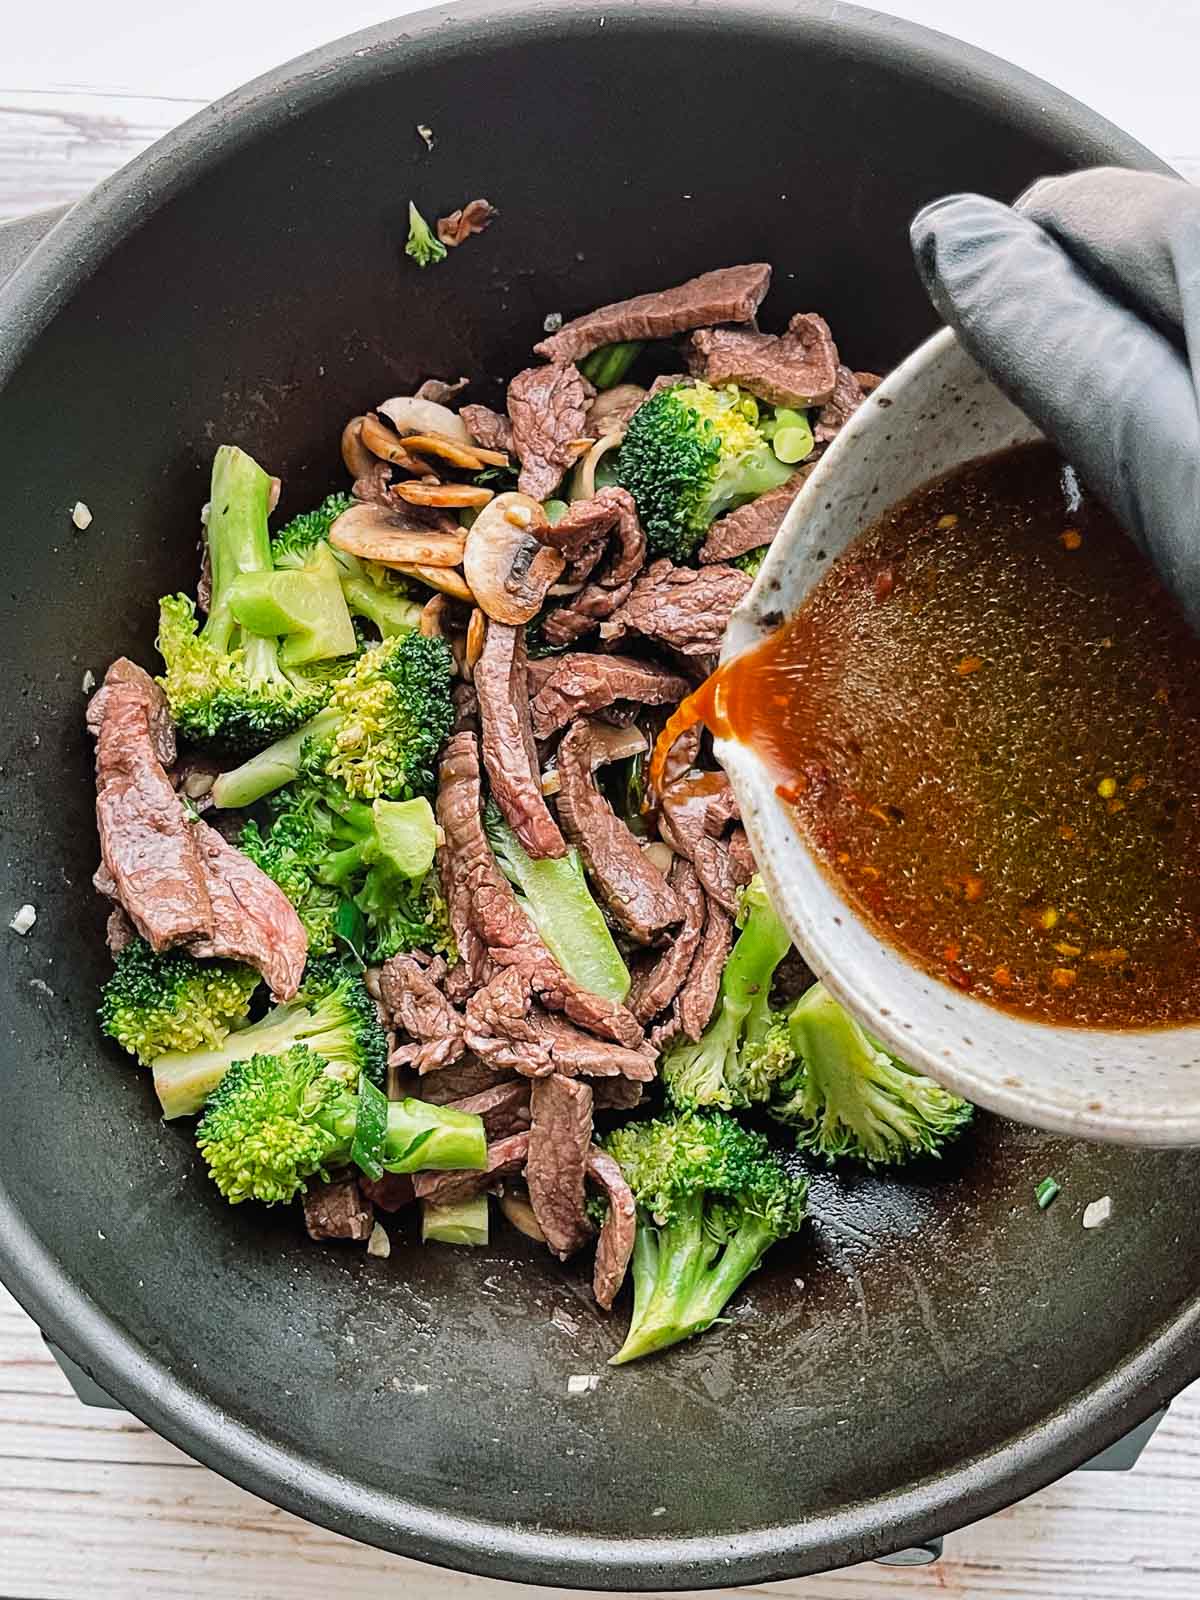 Pouring the sauce over beef and broccoli stir fry in a large wok.